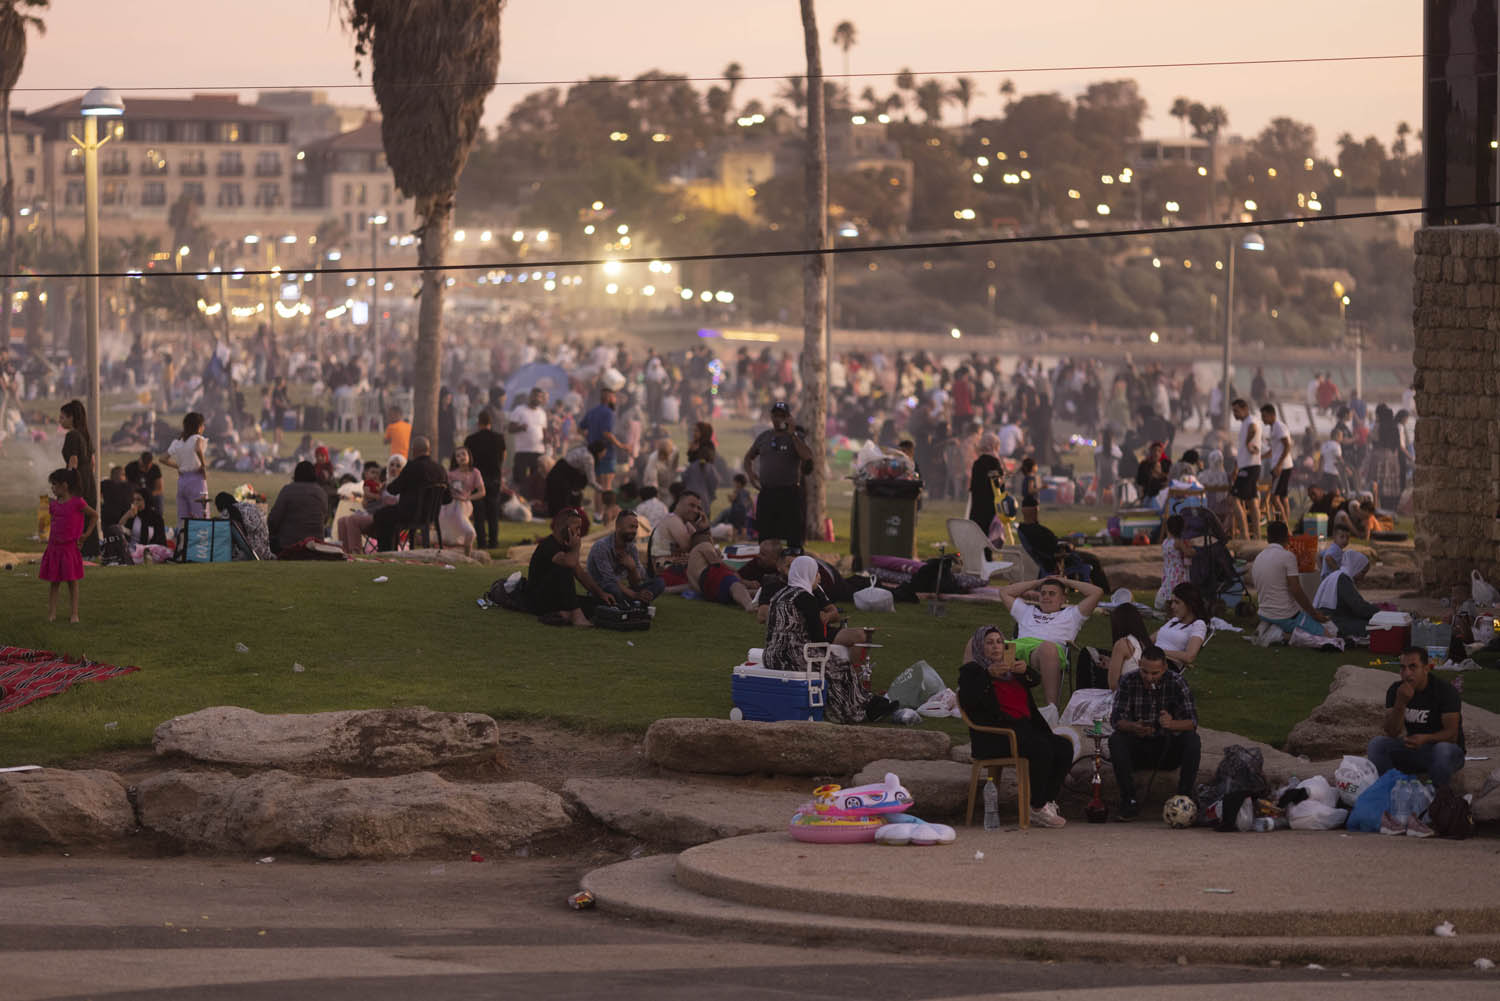 Thousands of Palestinians from the West Bank celebrate Eid al-Adha at the park next to Jaffa beach, July 11, 2022. (Oren Ziv)